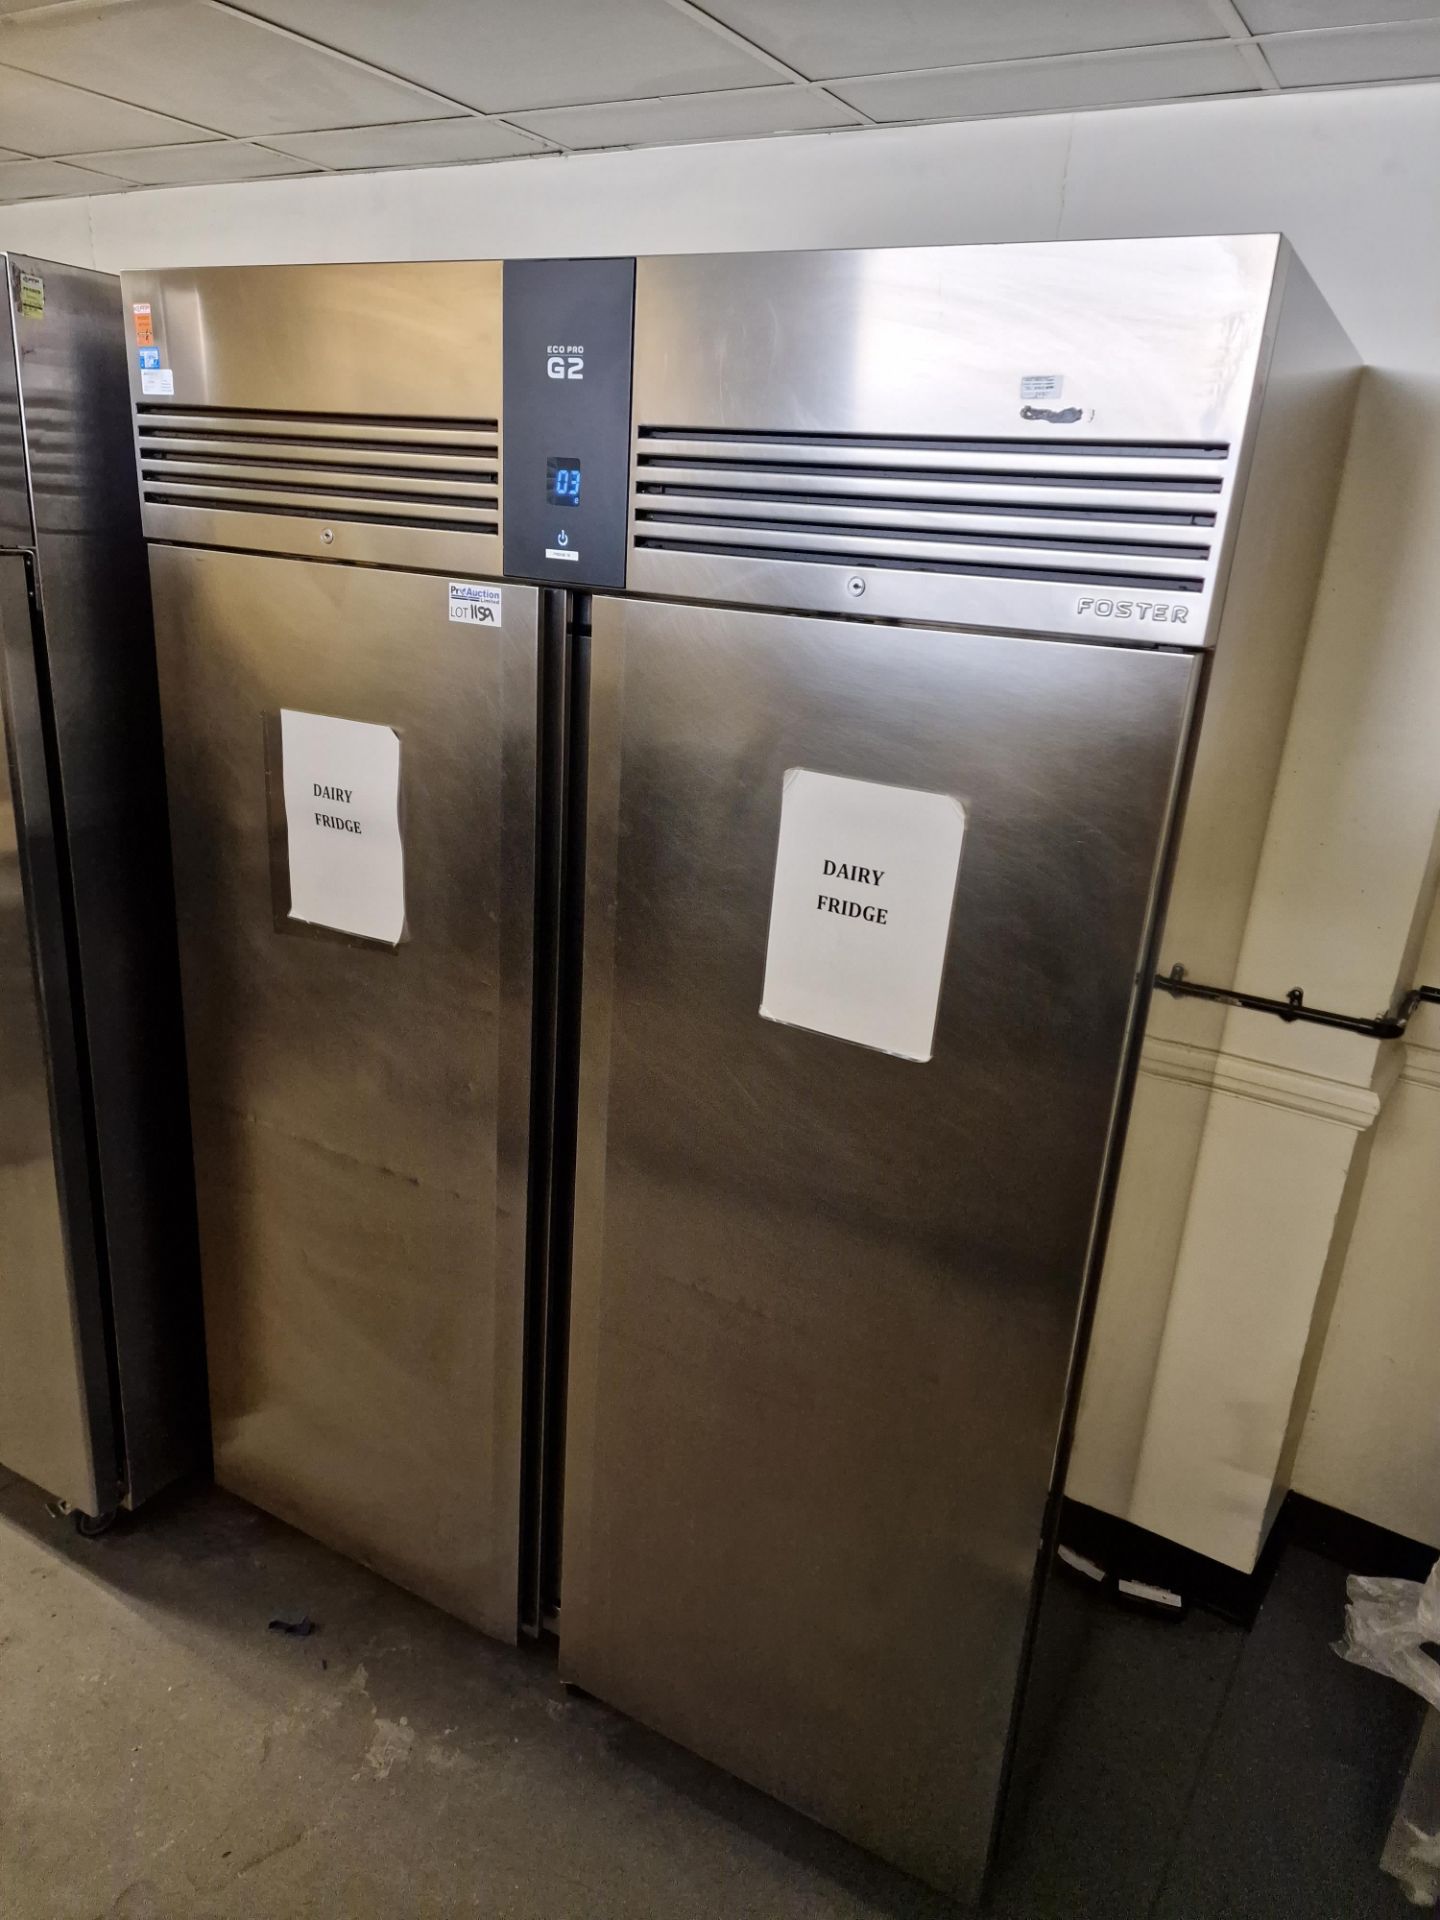 Foster Refrigeration EP1440H Pro G2 Stainless Steel Heavy Duty Vertical Double Door Refrigerator - Image 3 of 4